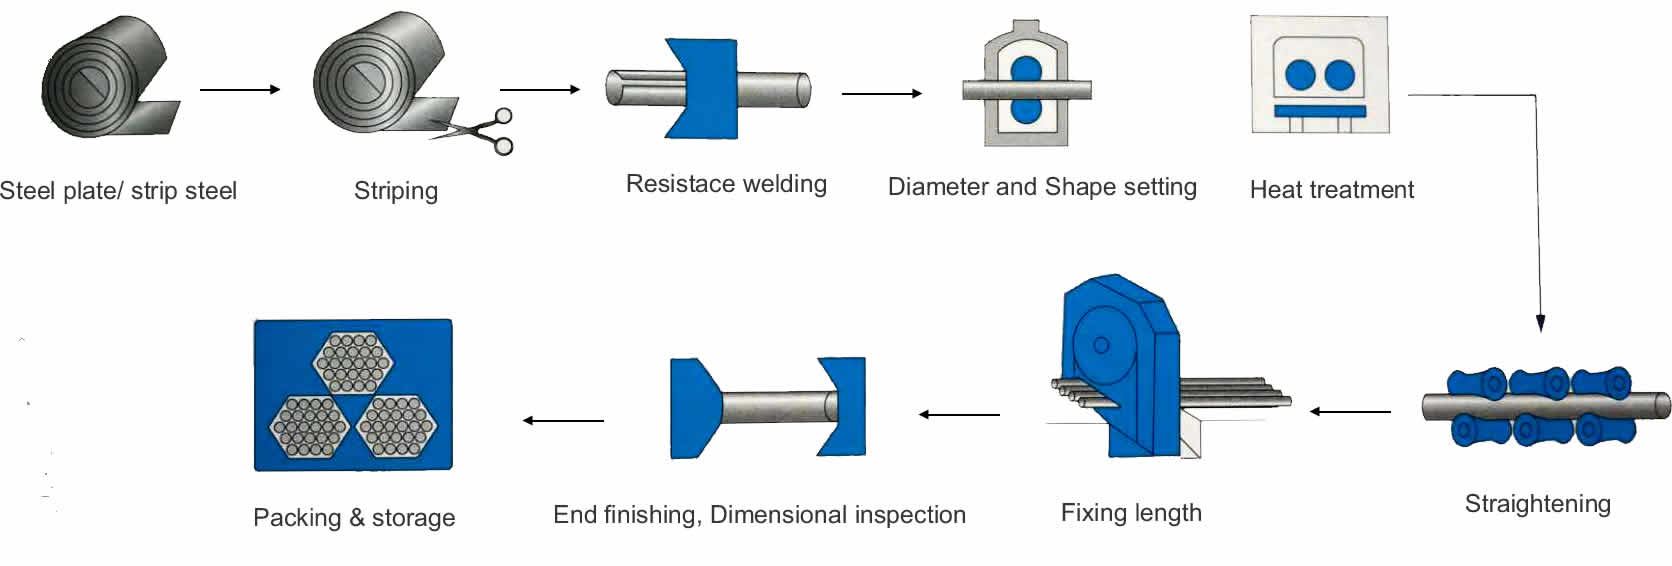 special-precision-welded-process-flow.jpg